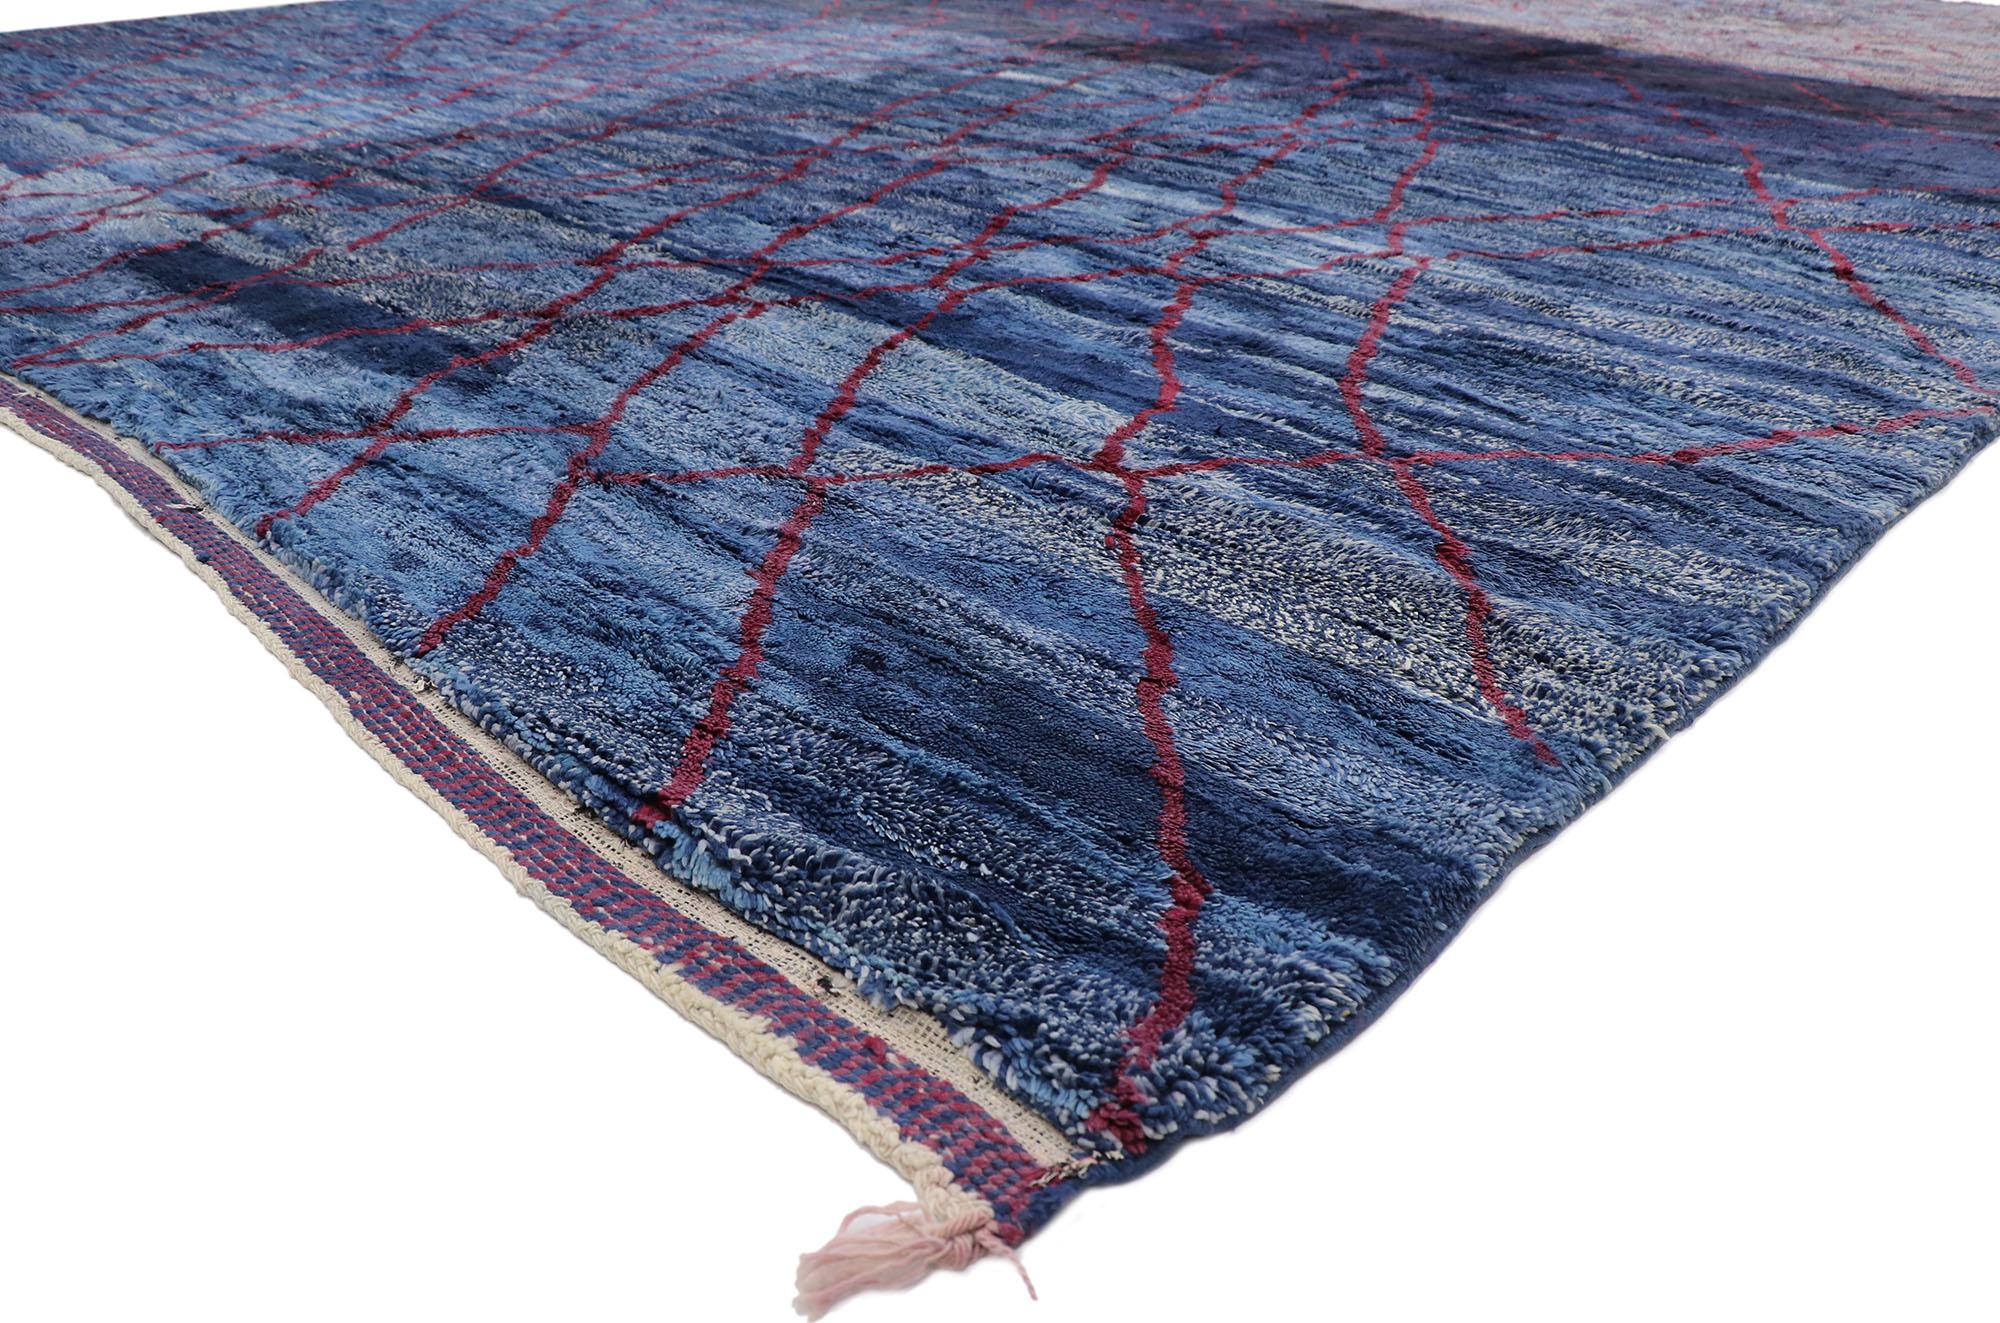 21103 New Oversized Berber Abstract Moroccan Rug 14'11 x 20'01.
With its incredible detail and lavish texture, this hand knotted wool oversized Abstract Moroccan rug is a captivating vision of woven beauty. It features raspberry red colored lines